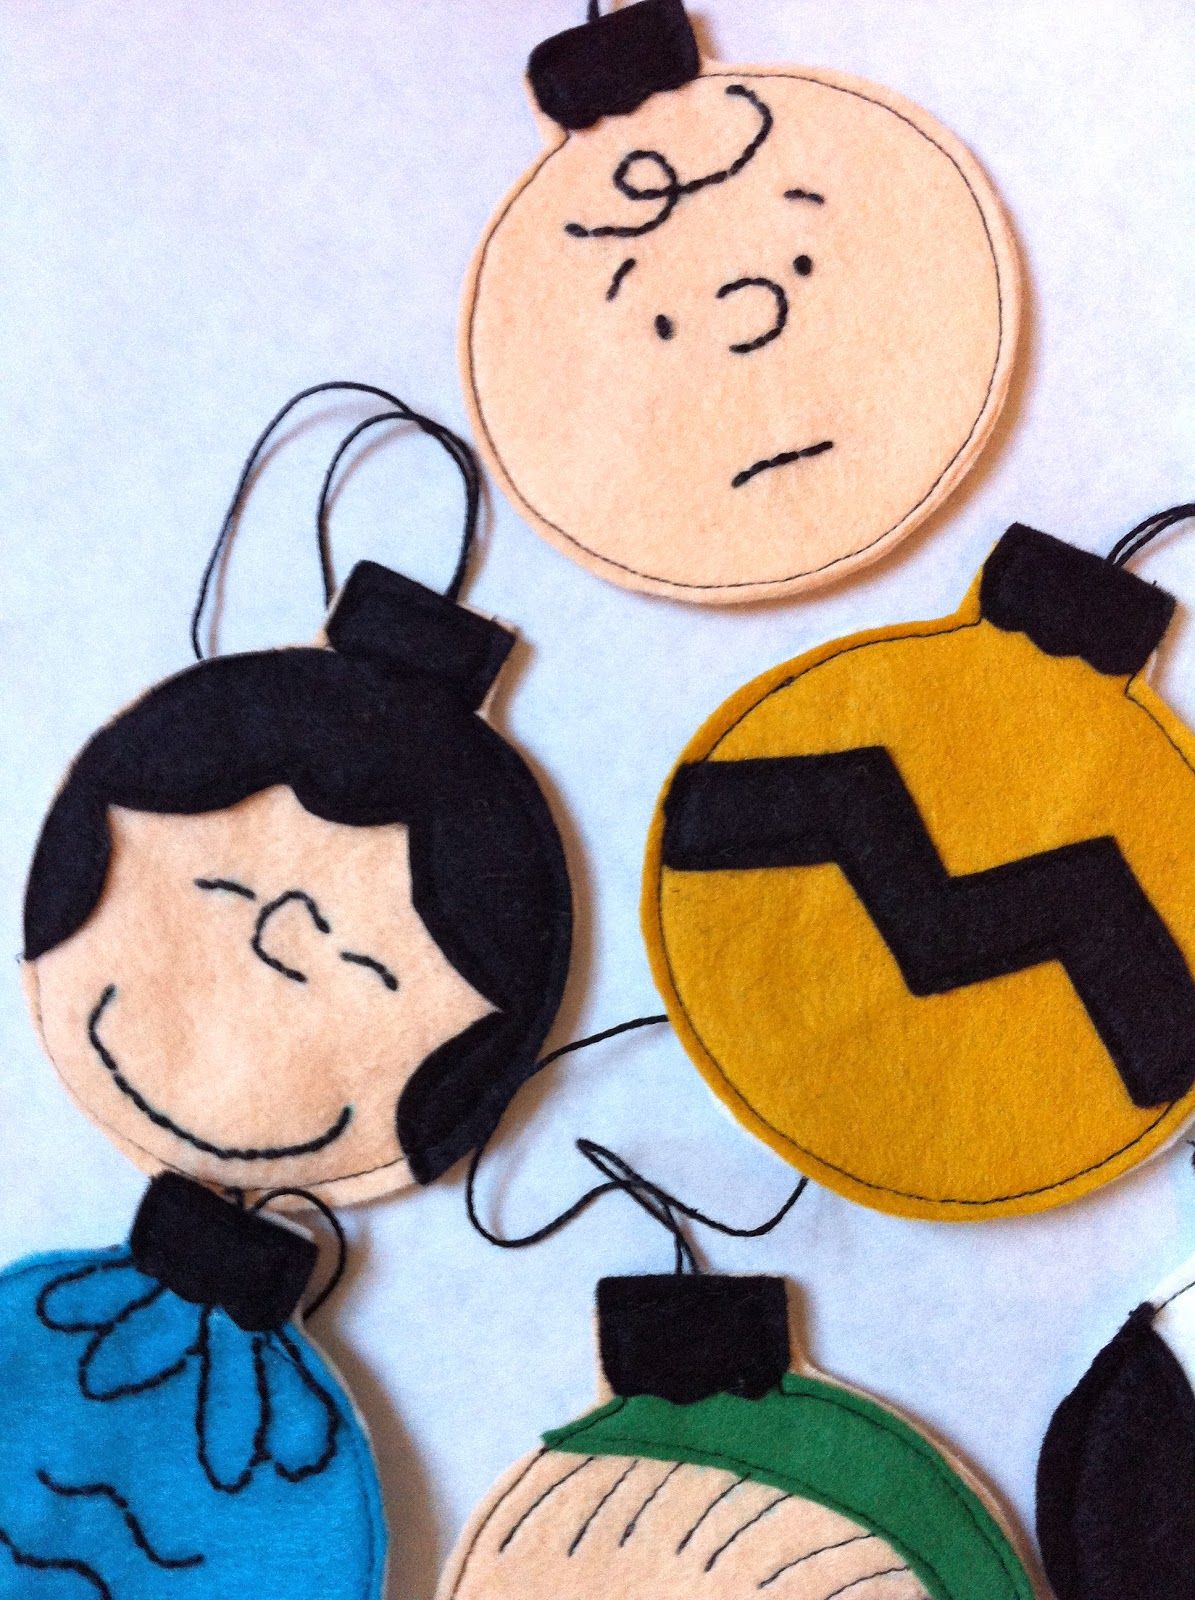 Charlie Brown Christmas Ornaments Tutorial– LOVE THESE!